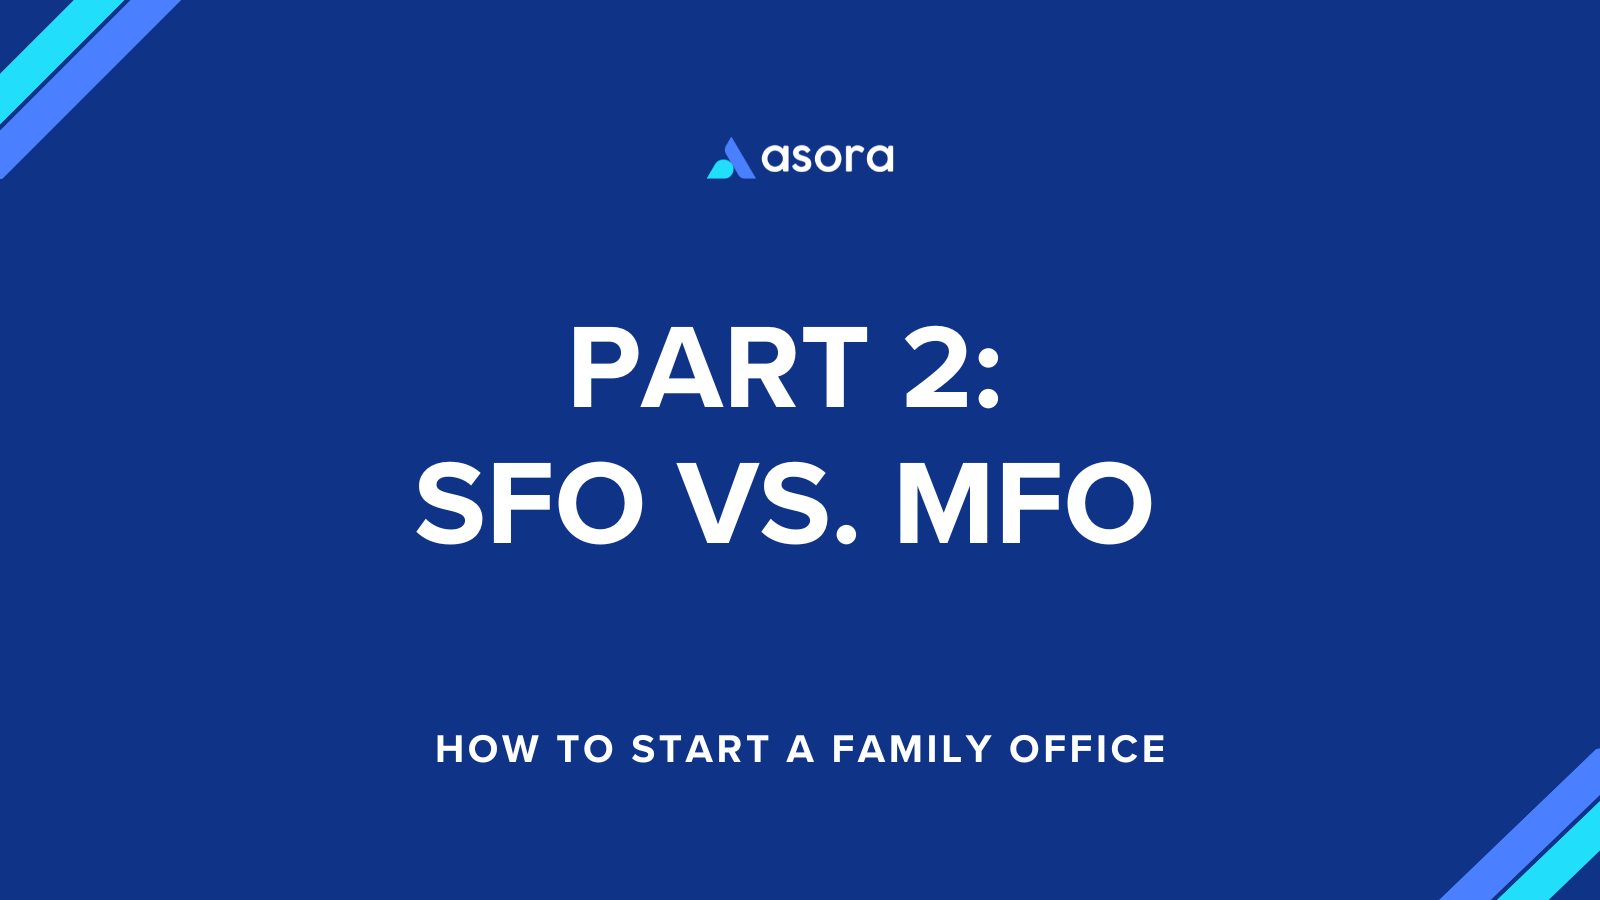 Part 2: Choosing Between Single Family Office and Multi-Family Office